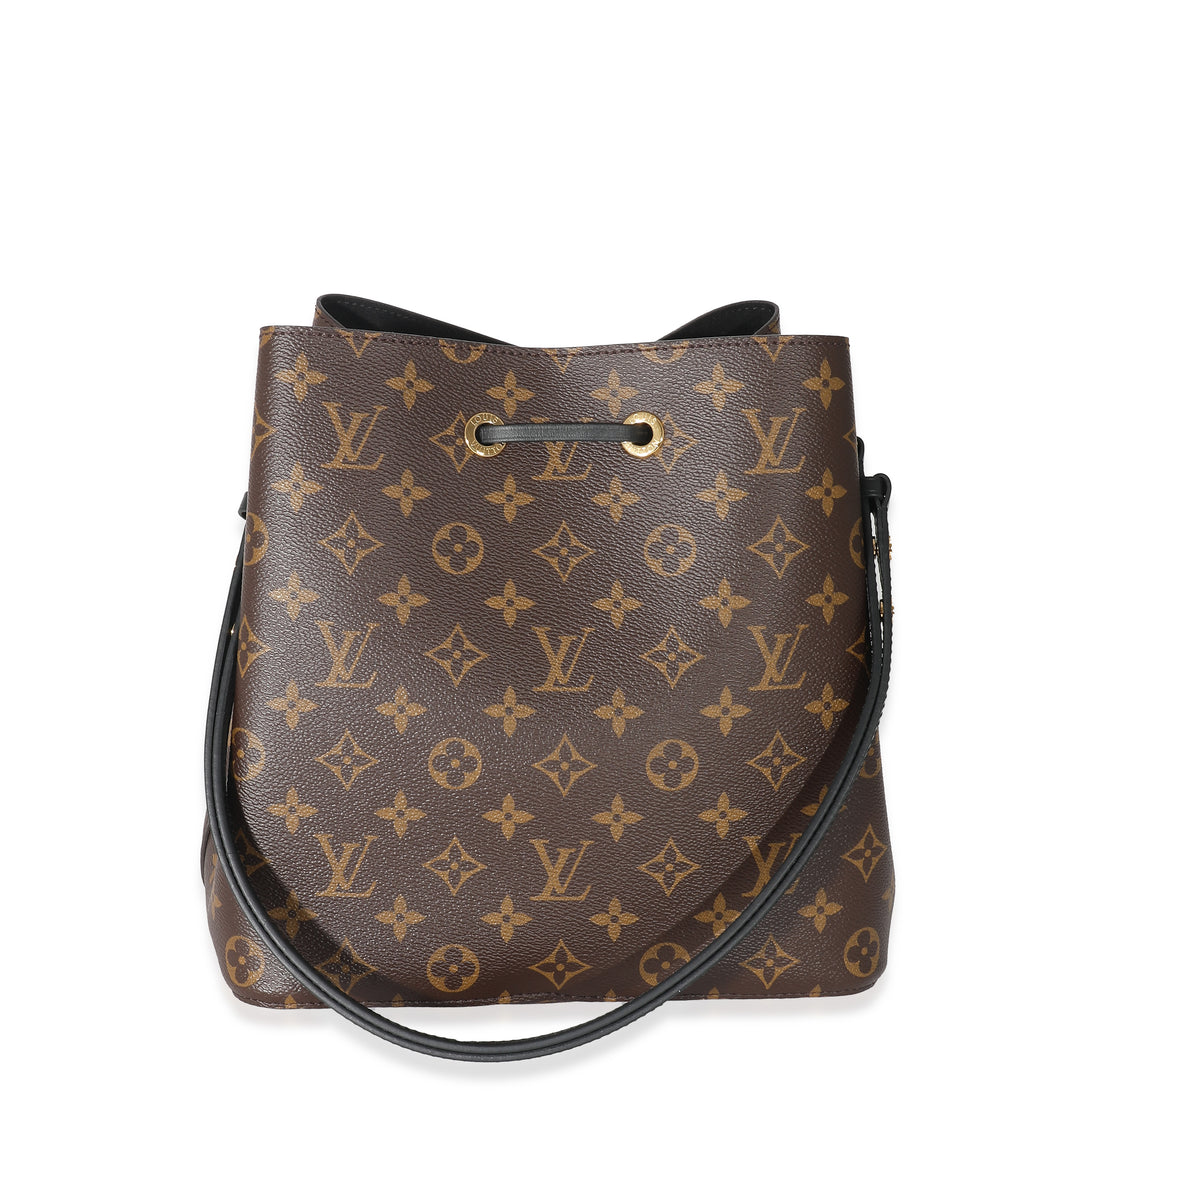 Louis Vuitton backpack in brown monogram canvas and black leather